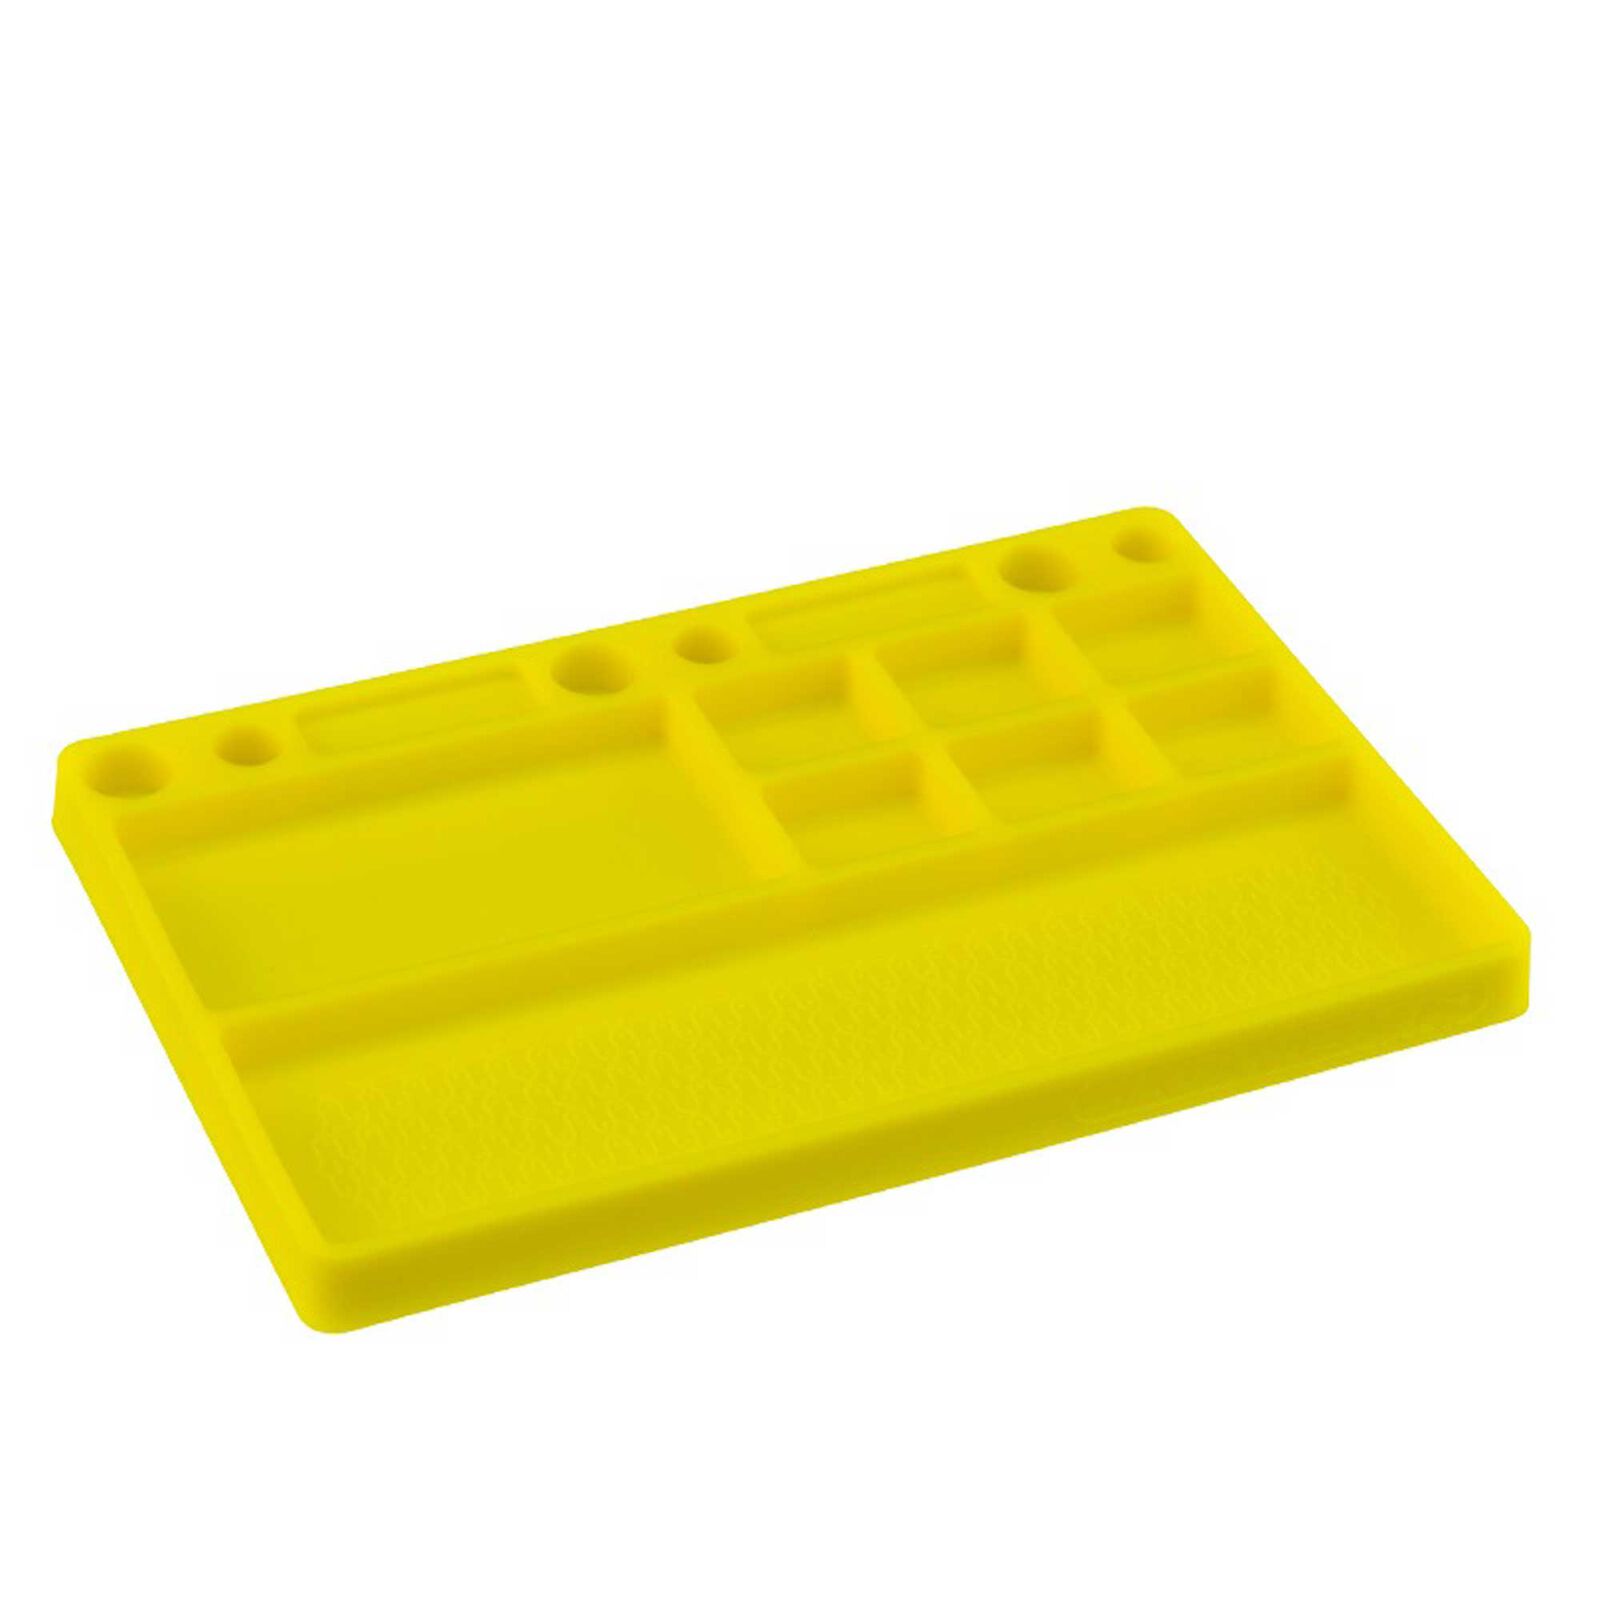 Dirt Racing Parts Tray Rubber Material, Yellow